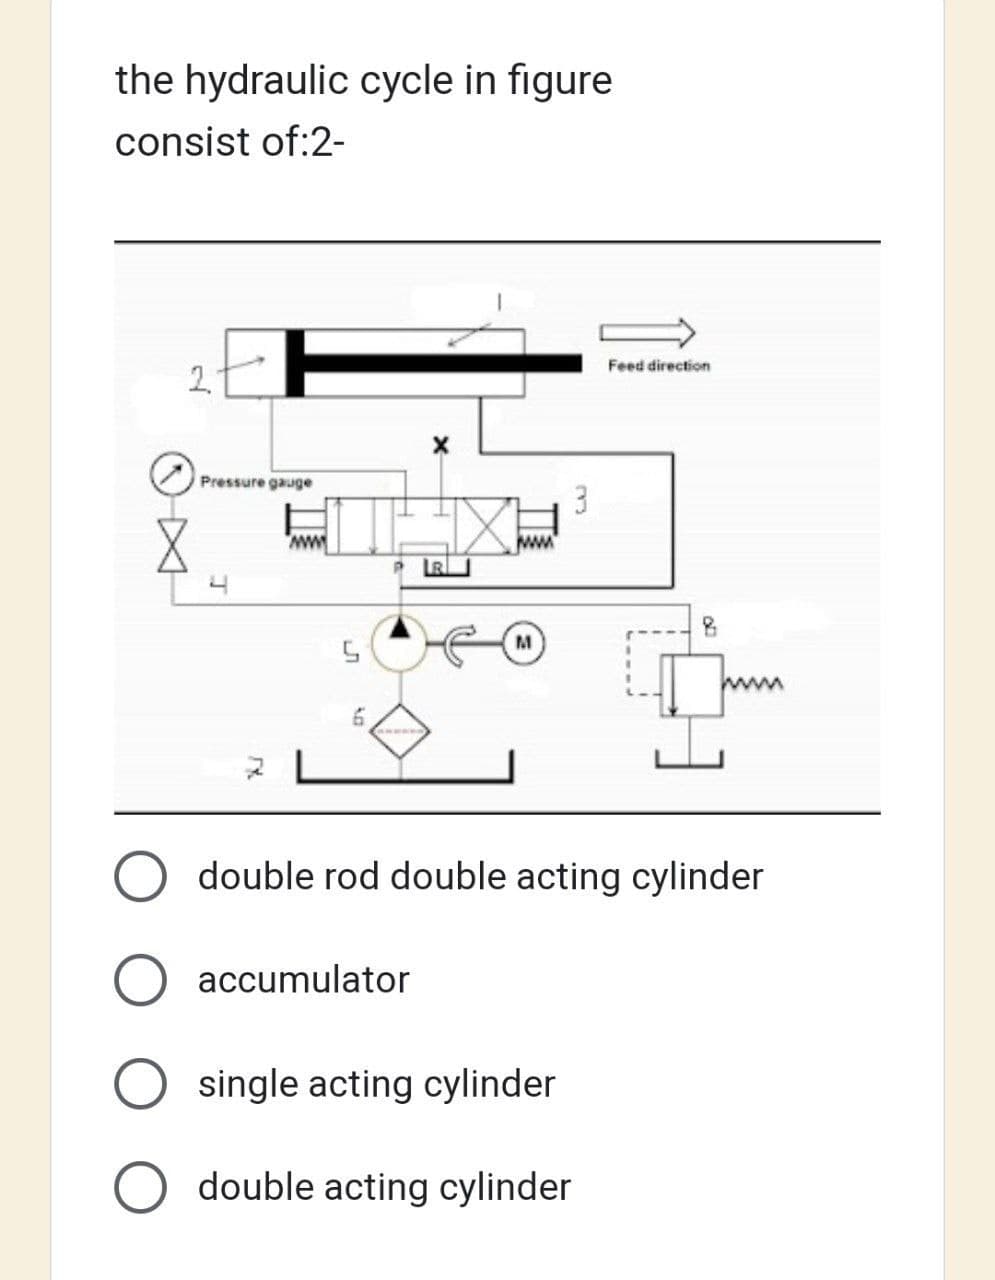 the hydraulic cycle in figure
consist of:2-
2
Pressure gauge
5
X
PR
O accumulator
www.
M
3
Feed direction
double rod double acting cylinder
single acting cylinder
O double acting cylinder
8